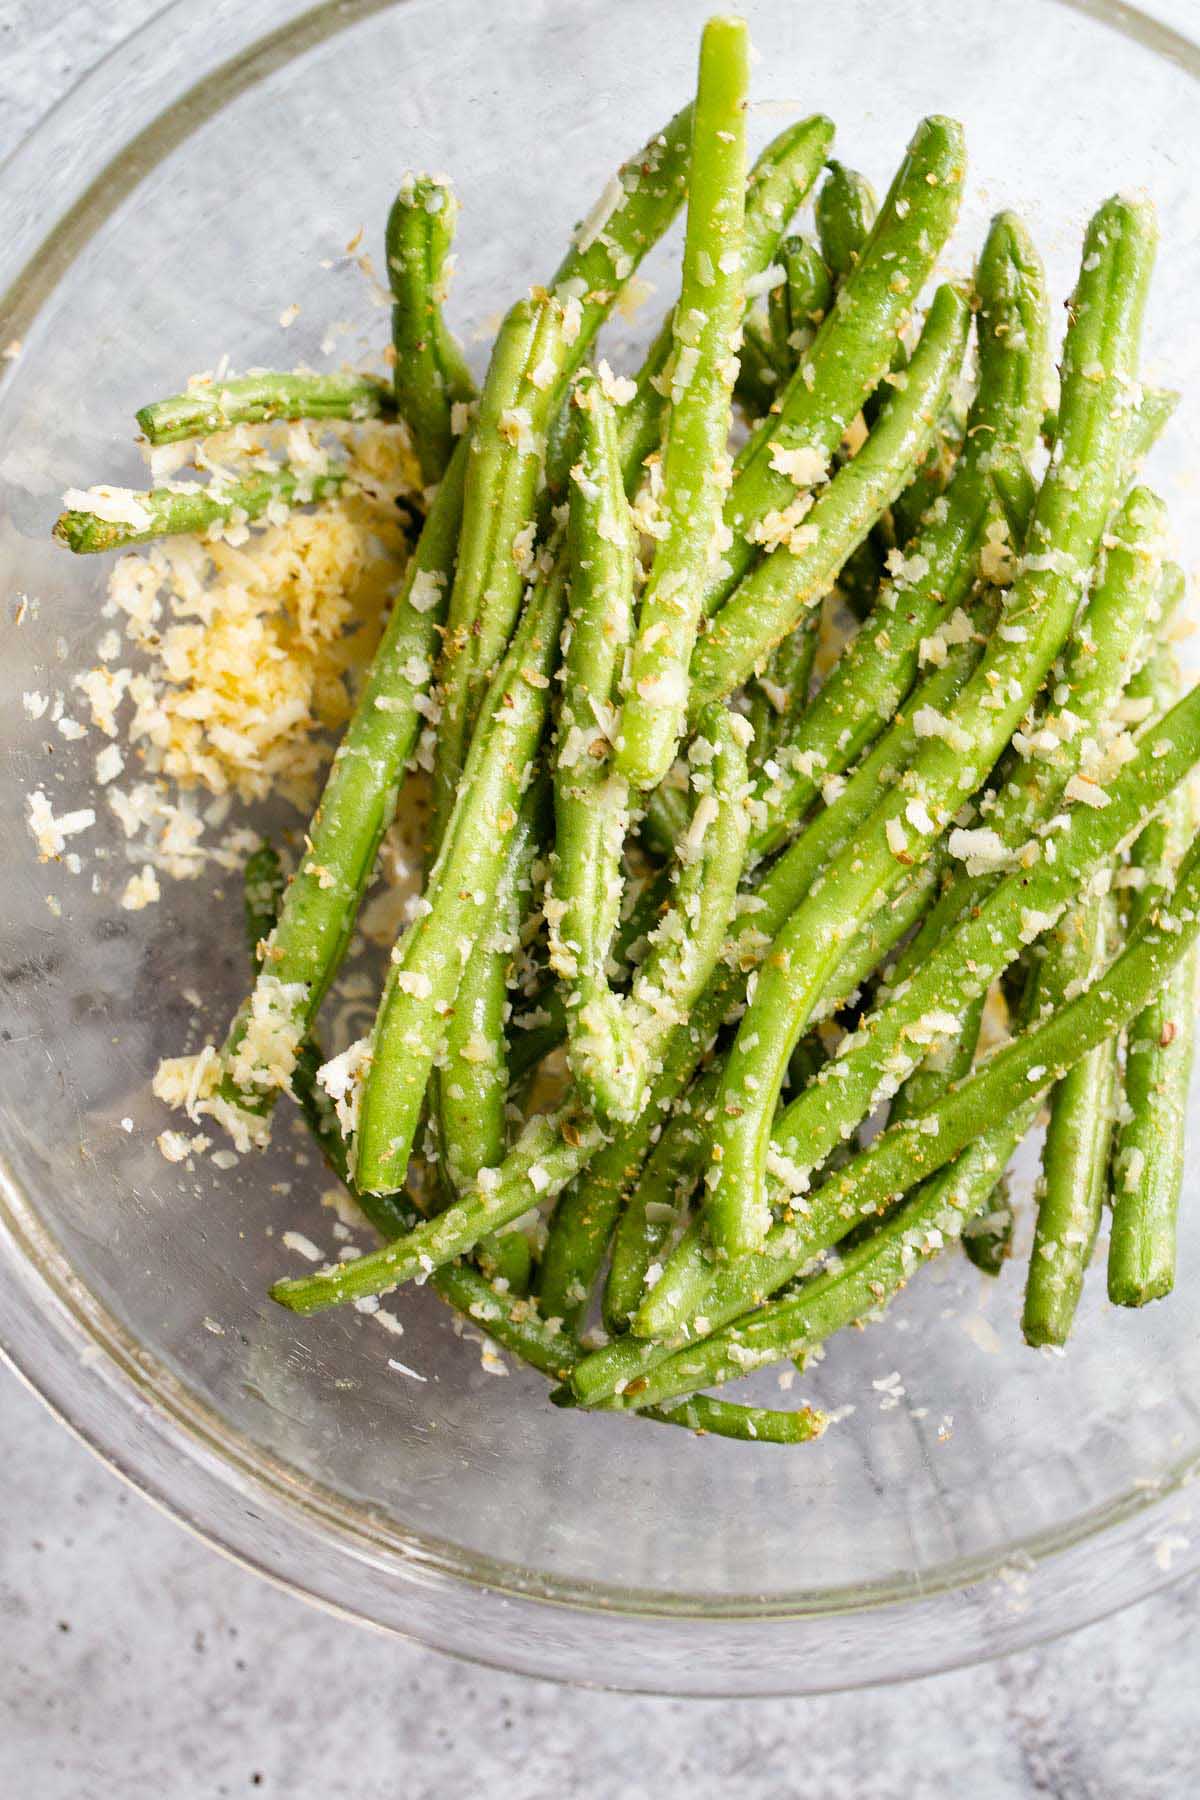 Green beans tossed with parmesan cheese in a bowl.